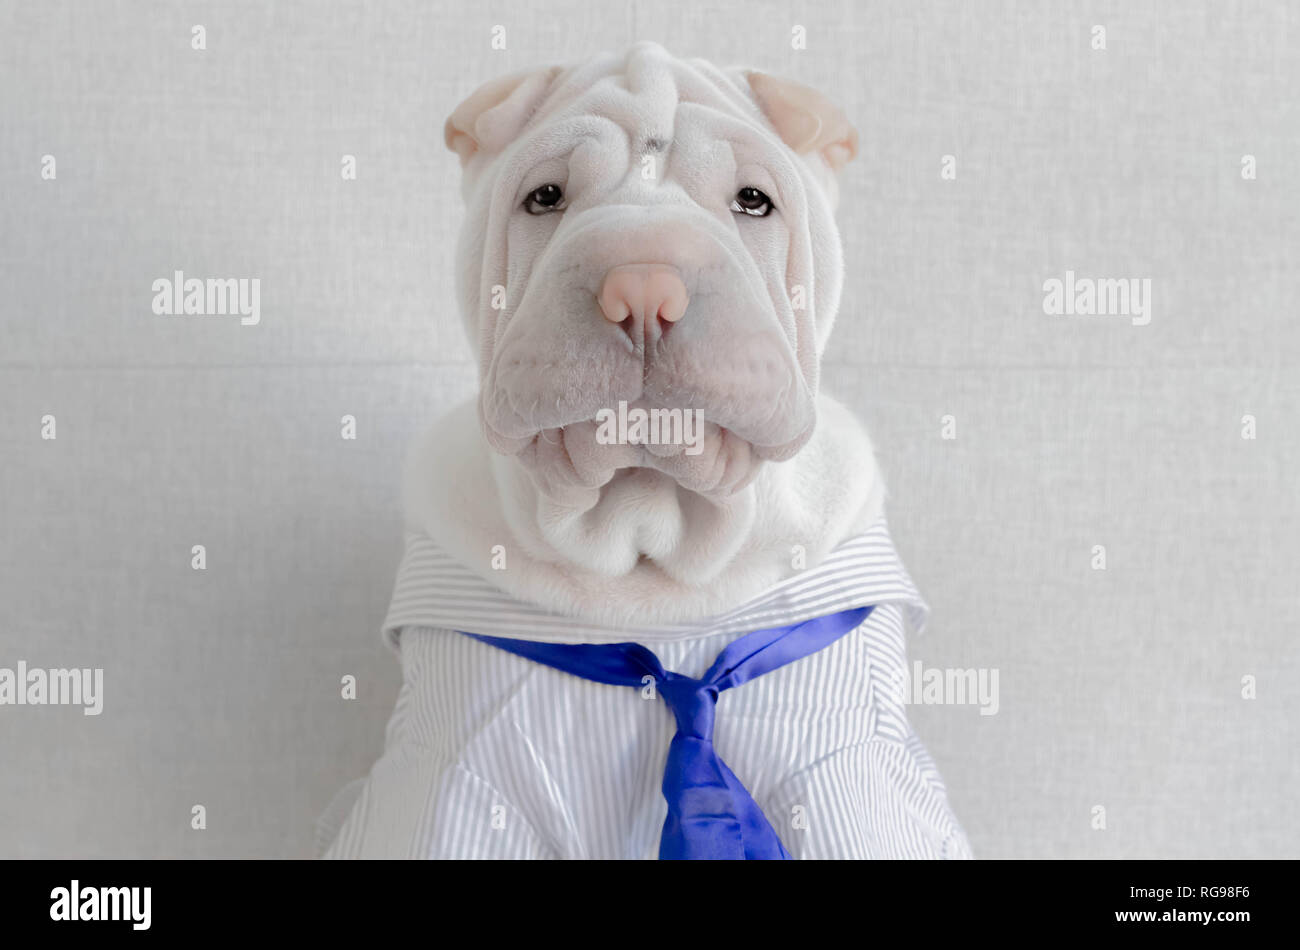 Shar pei puppy dog wearing a shirt and tie Stock Photo